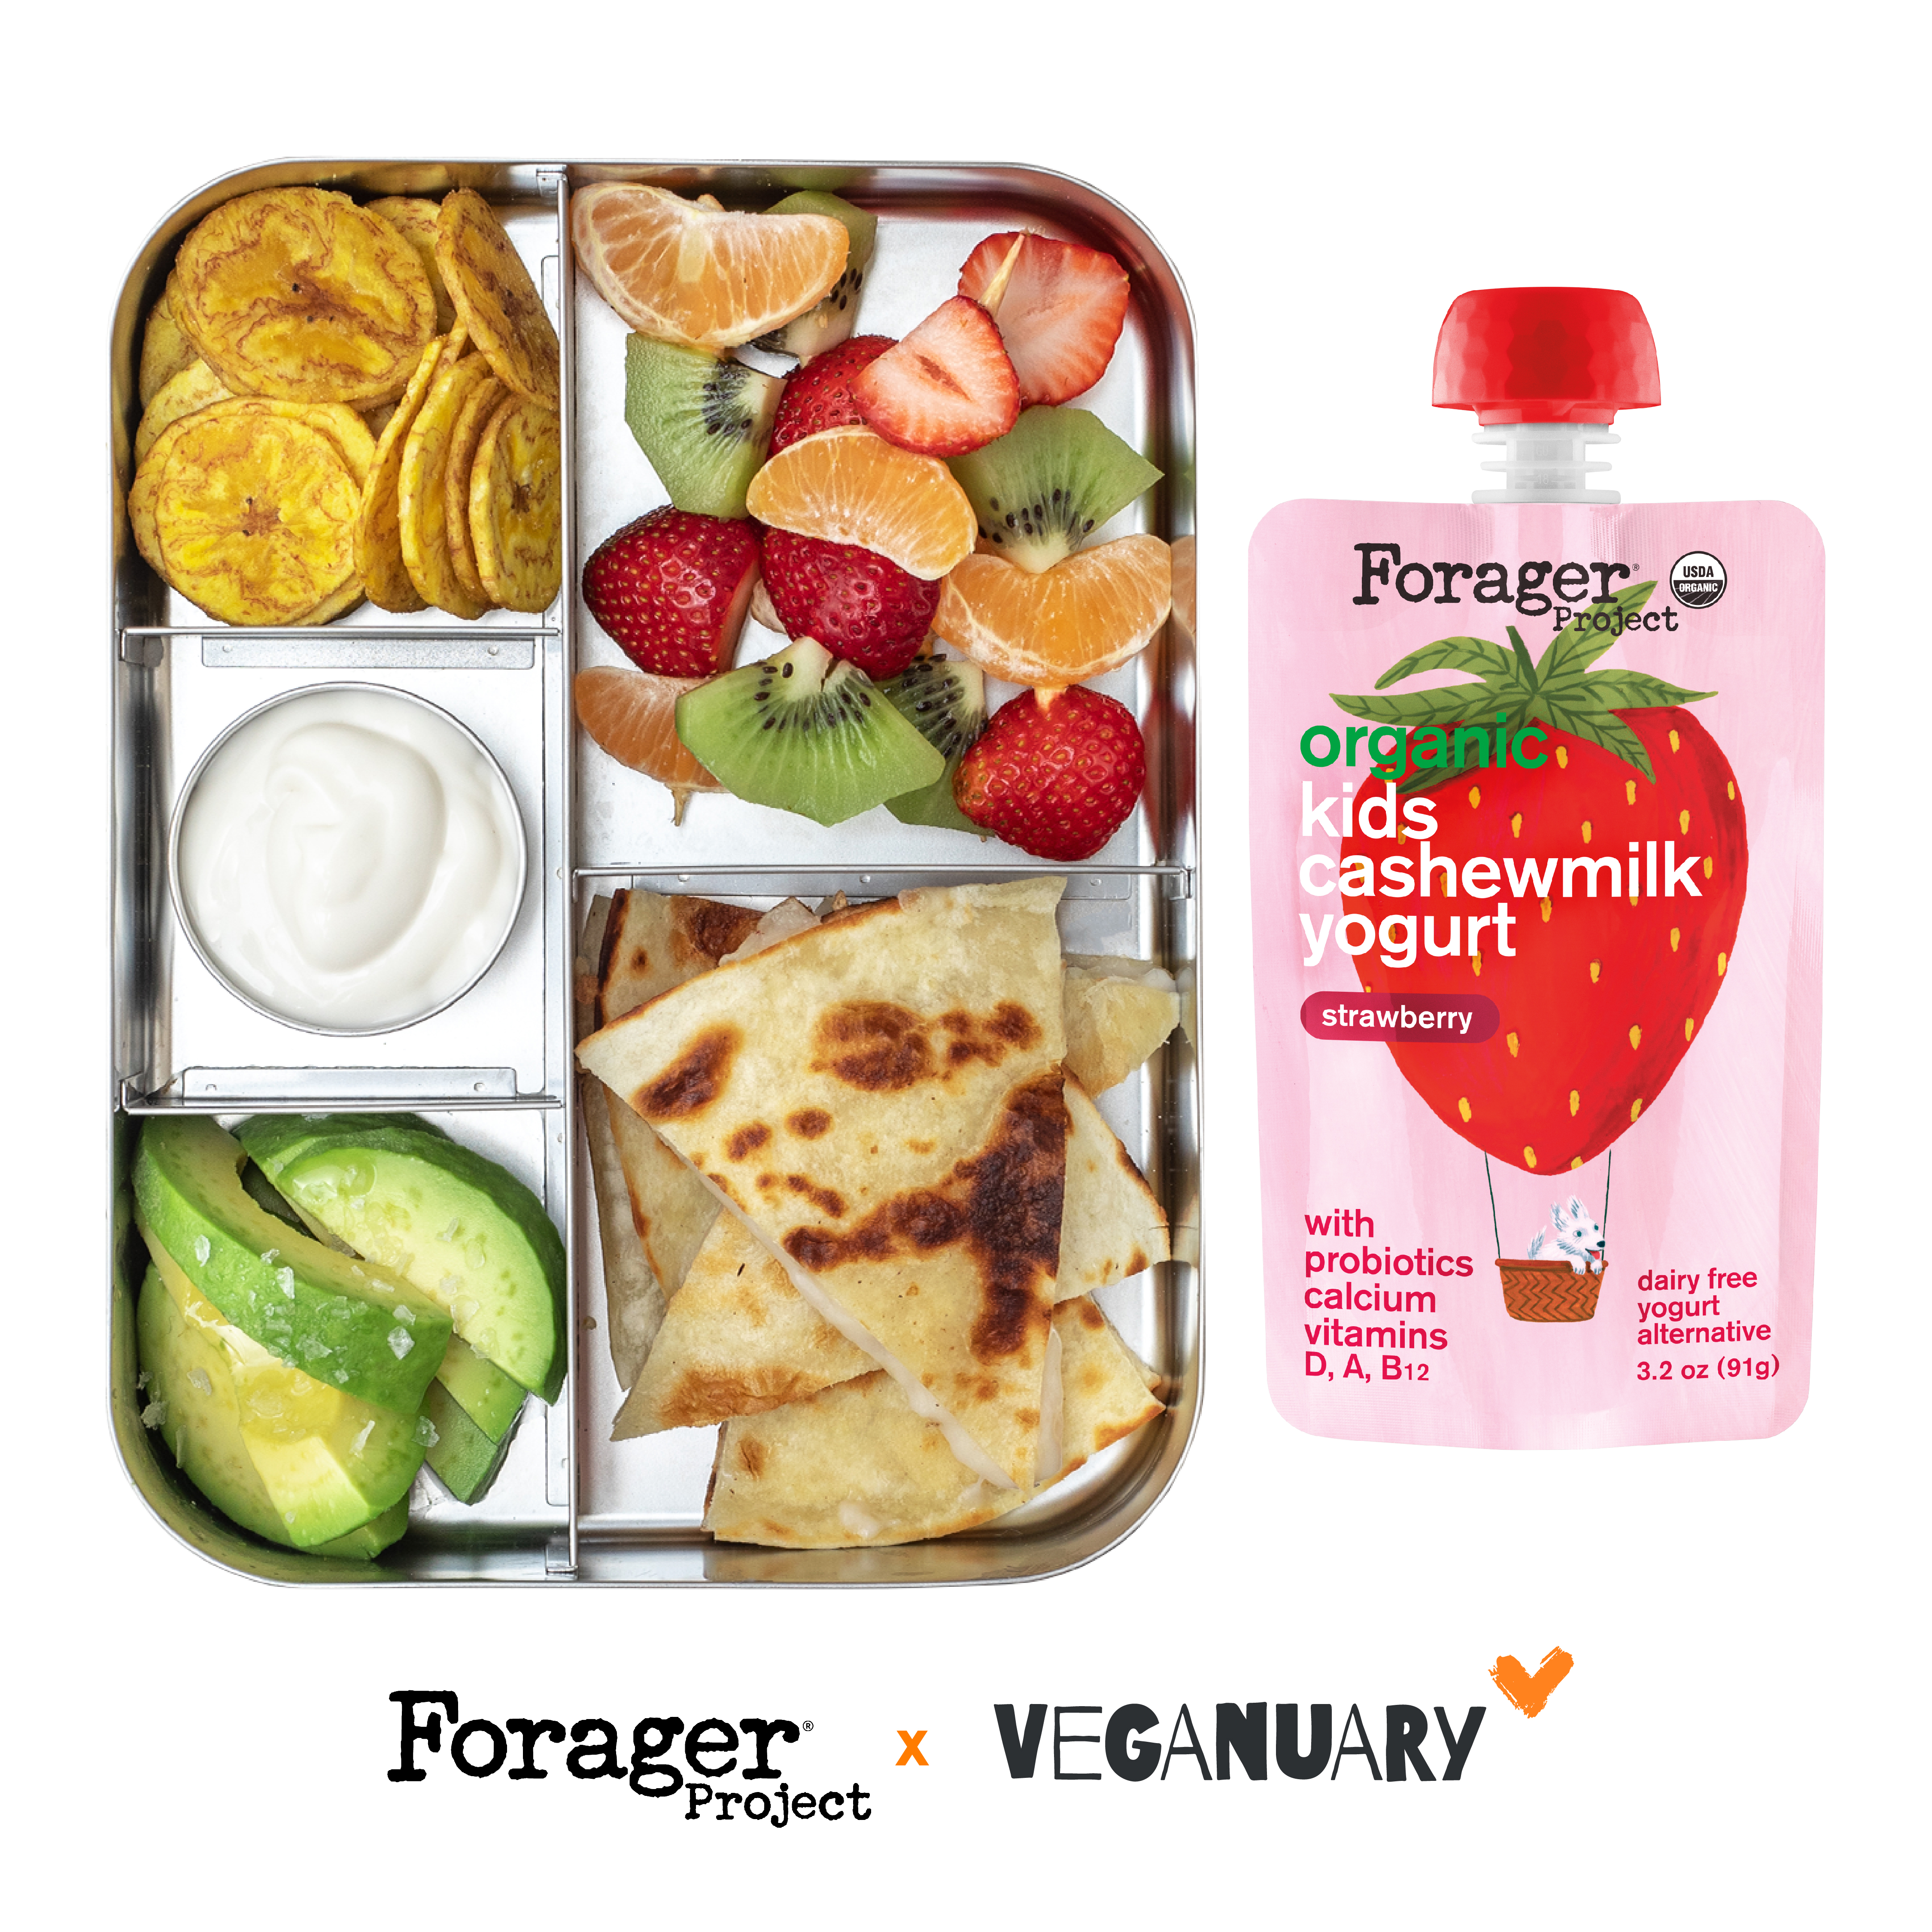 Forager Project® and Veganuary Join Forces to Make Kid-Friendly Plant-Based Eating Healthy, Easy, and Fun